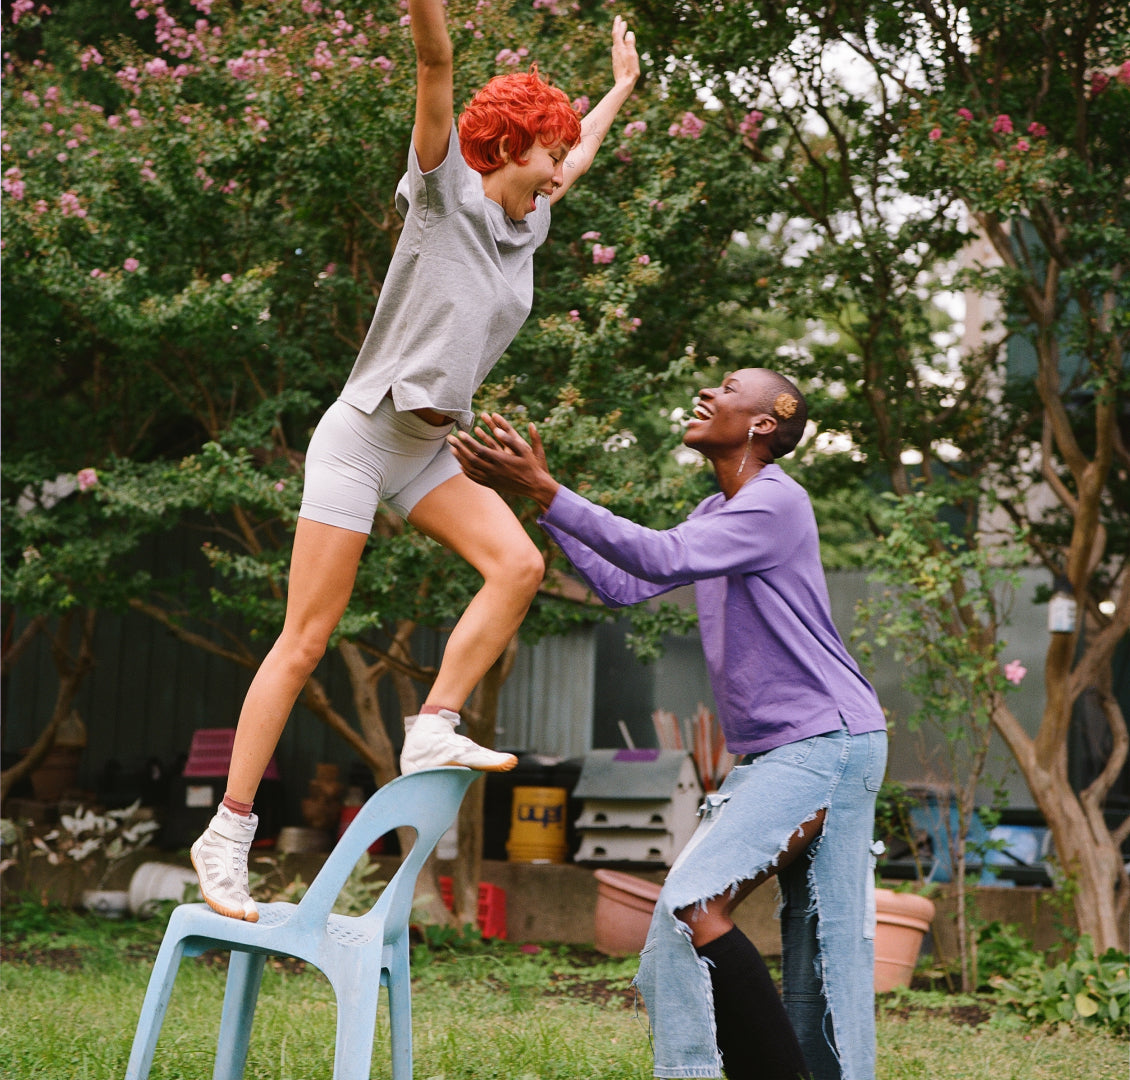 Person standing on chair with arms up, being caught by another person, both with joyful expressions